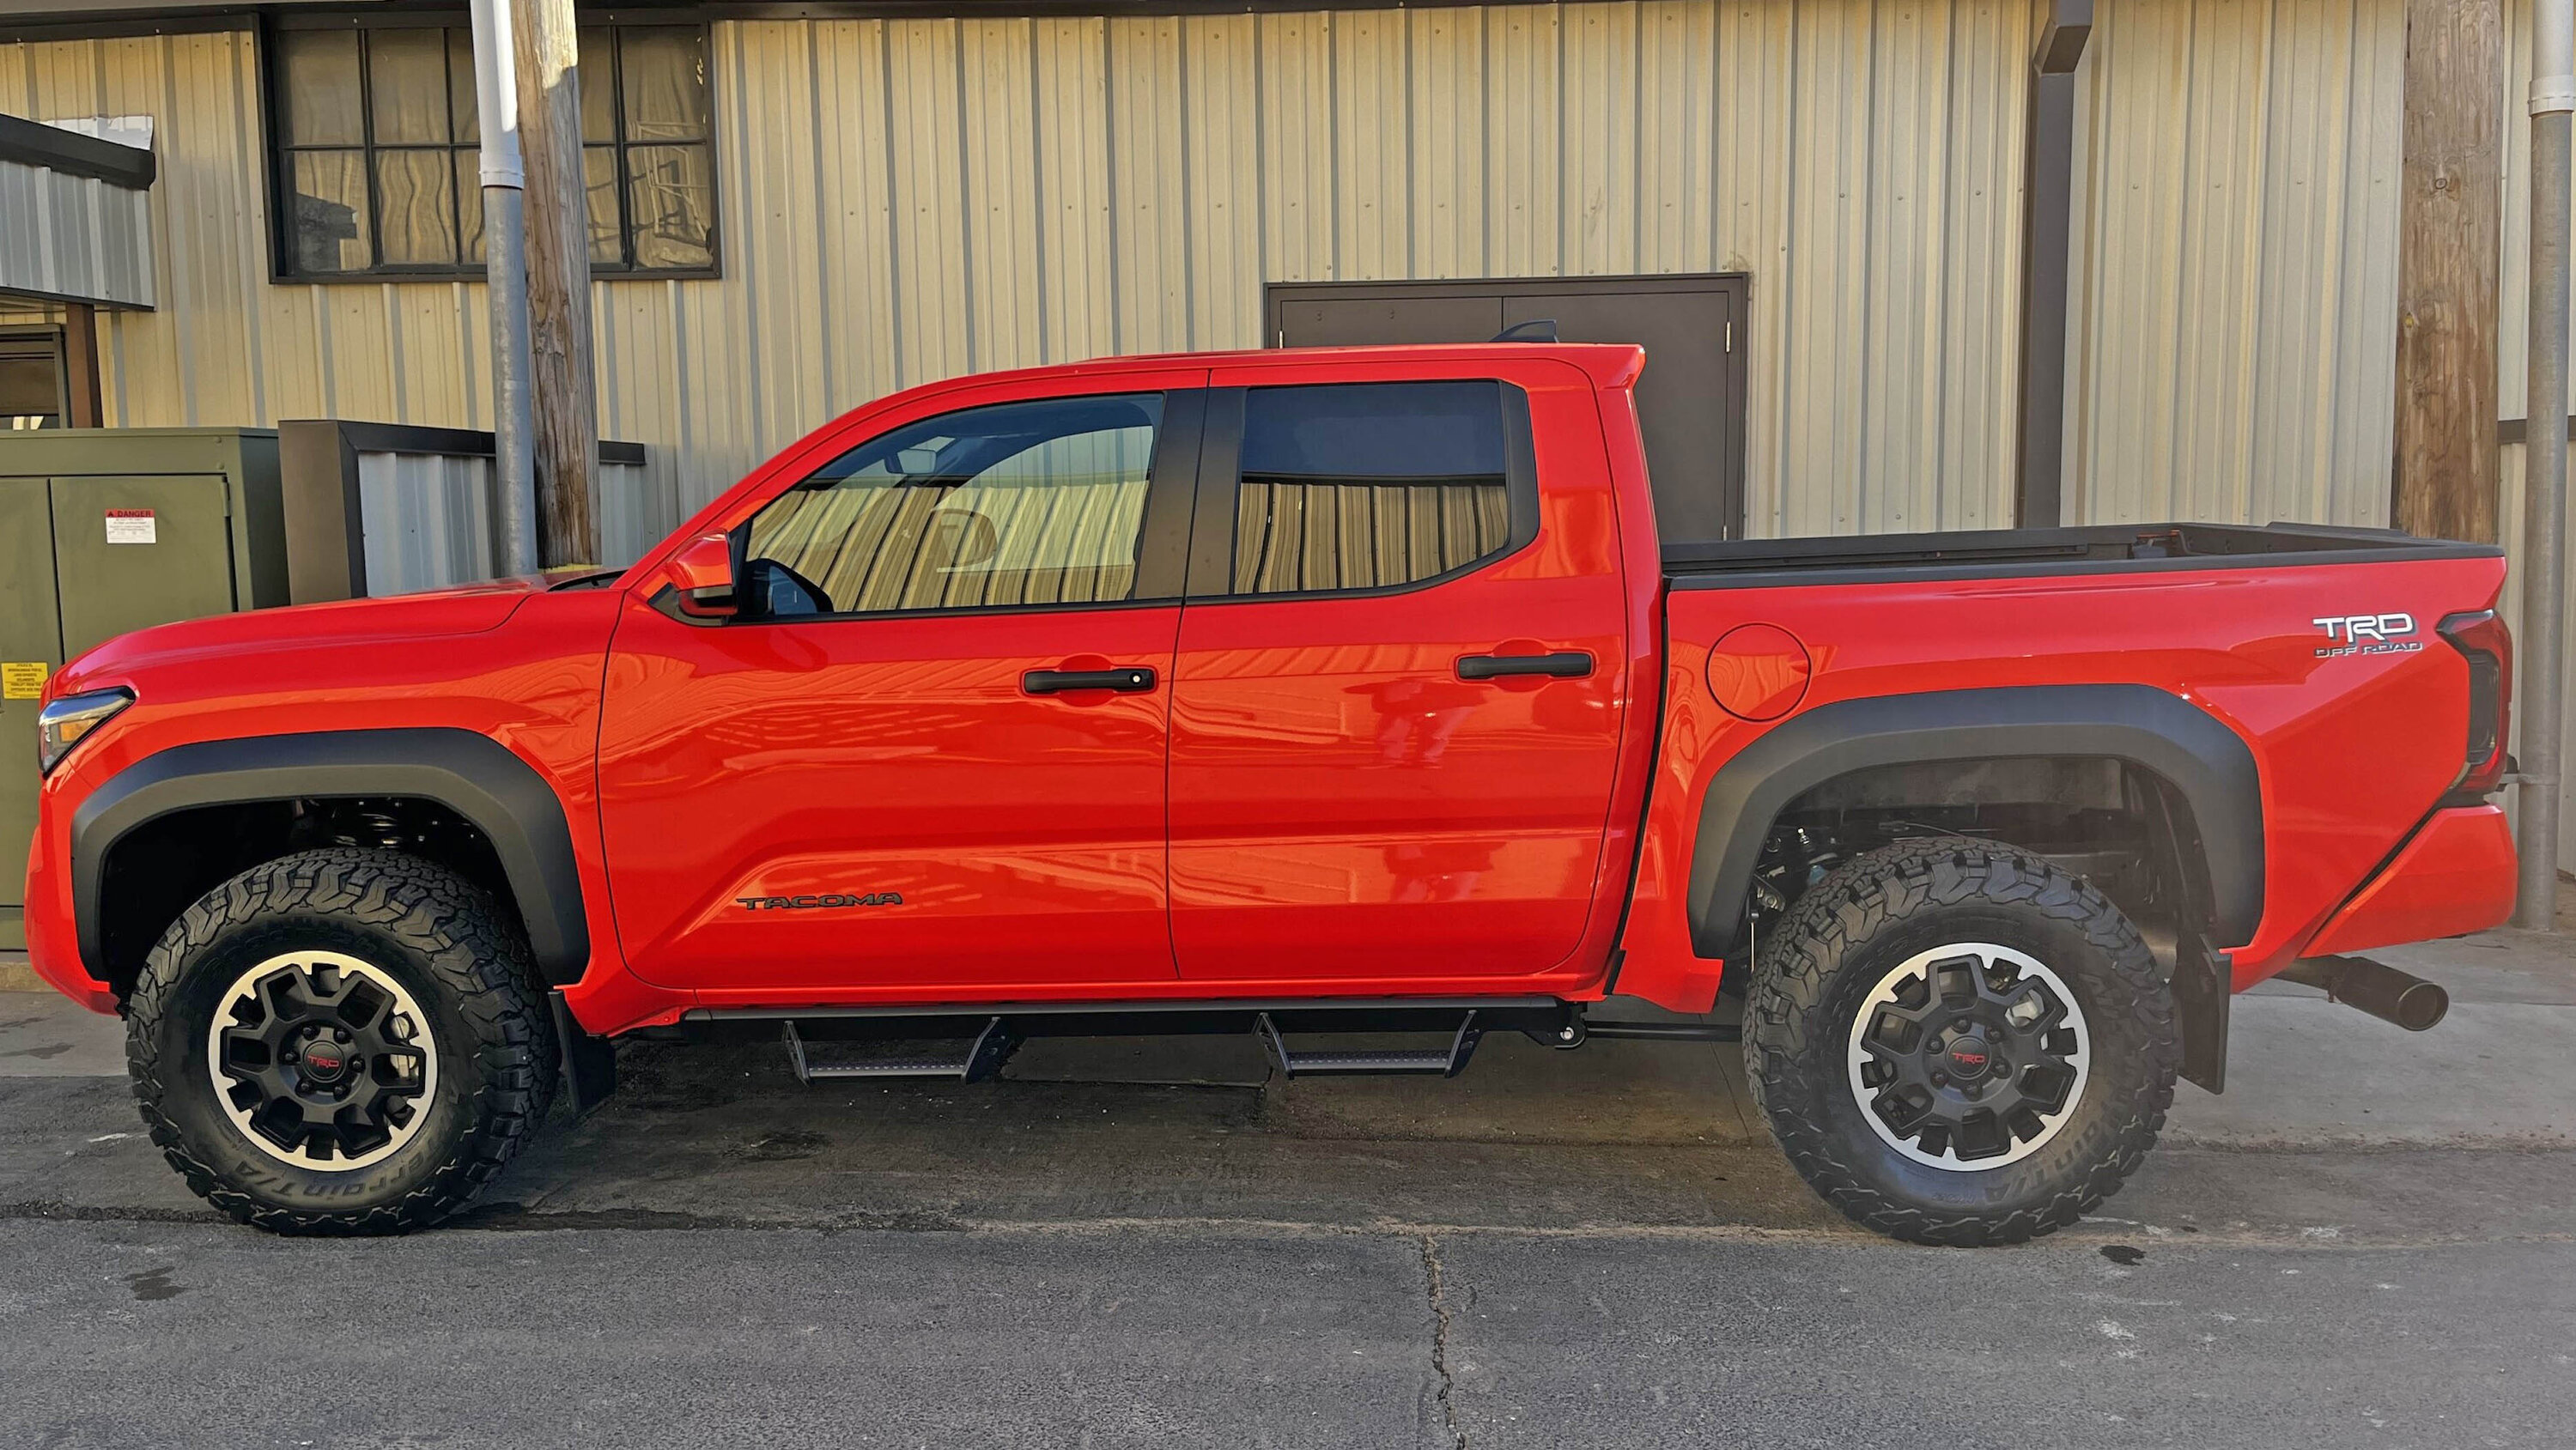 2024 Tacoma 285/70/17 tires (BFG All-Terrain T/A) on stock wheels, no poke, no trim, no cab mount removal (2024 TRD Off-Road) 285-70-17 tires stock factory wheels 2024 Tacoma TRD Off-Road  3